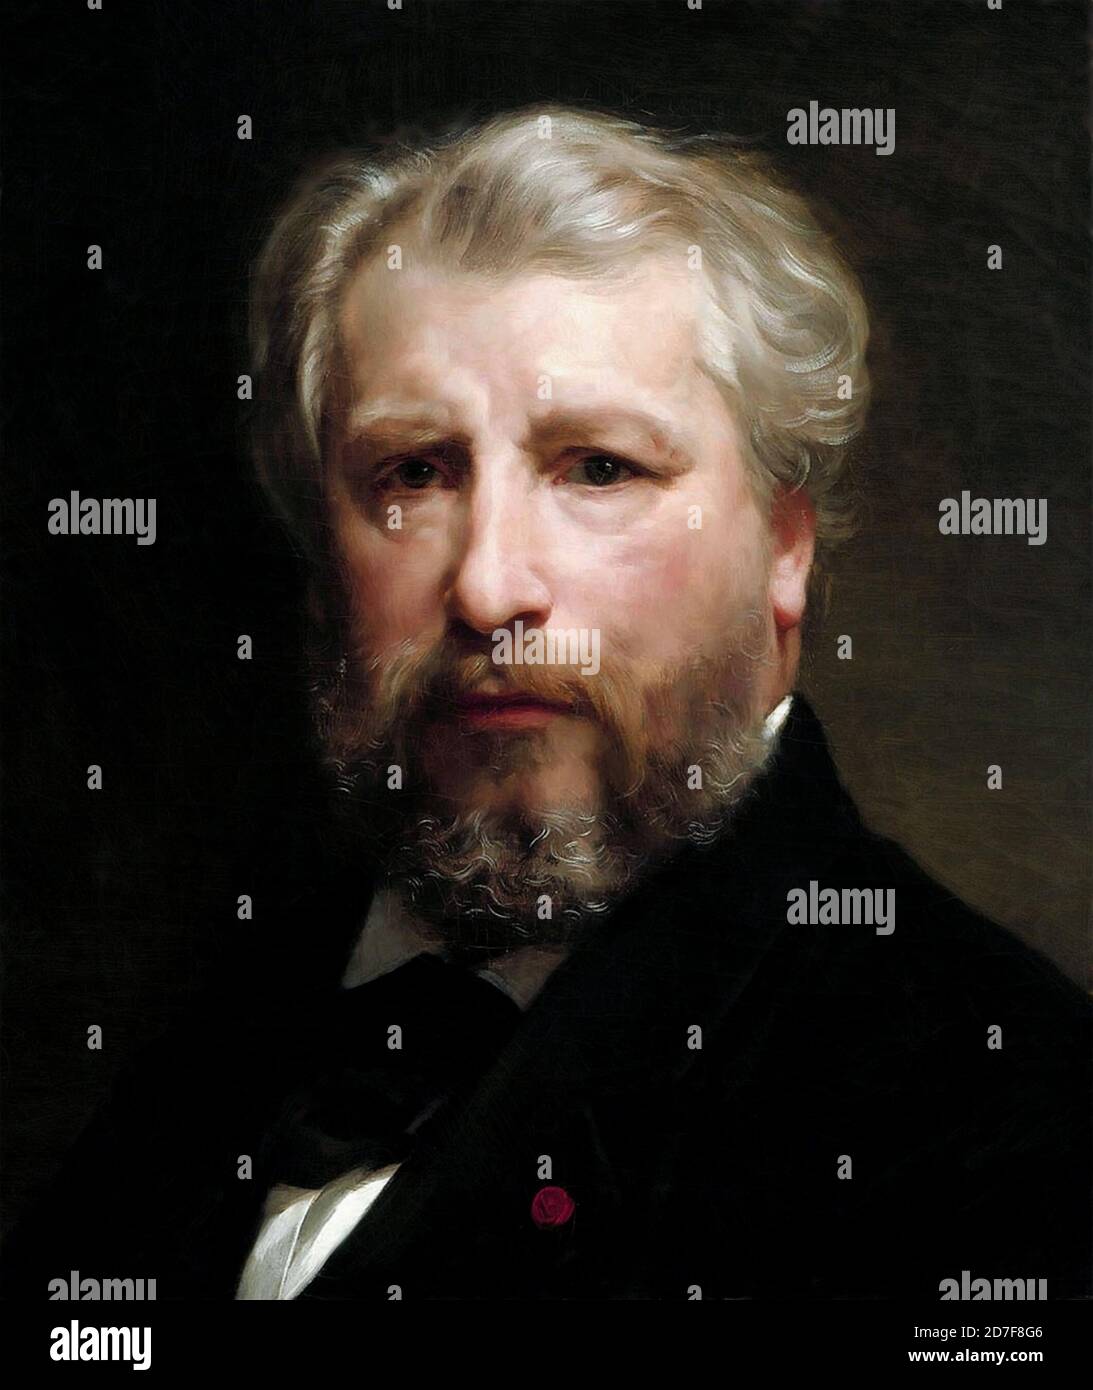 William Bouguereau. Self portrait of the French realist painter, William-Adolphe Bouguereau (1825-1905), oil on canvas, 1879 Stock Photo